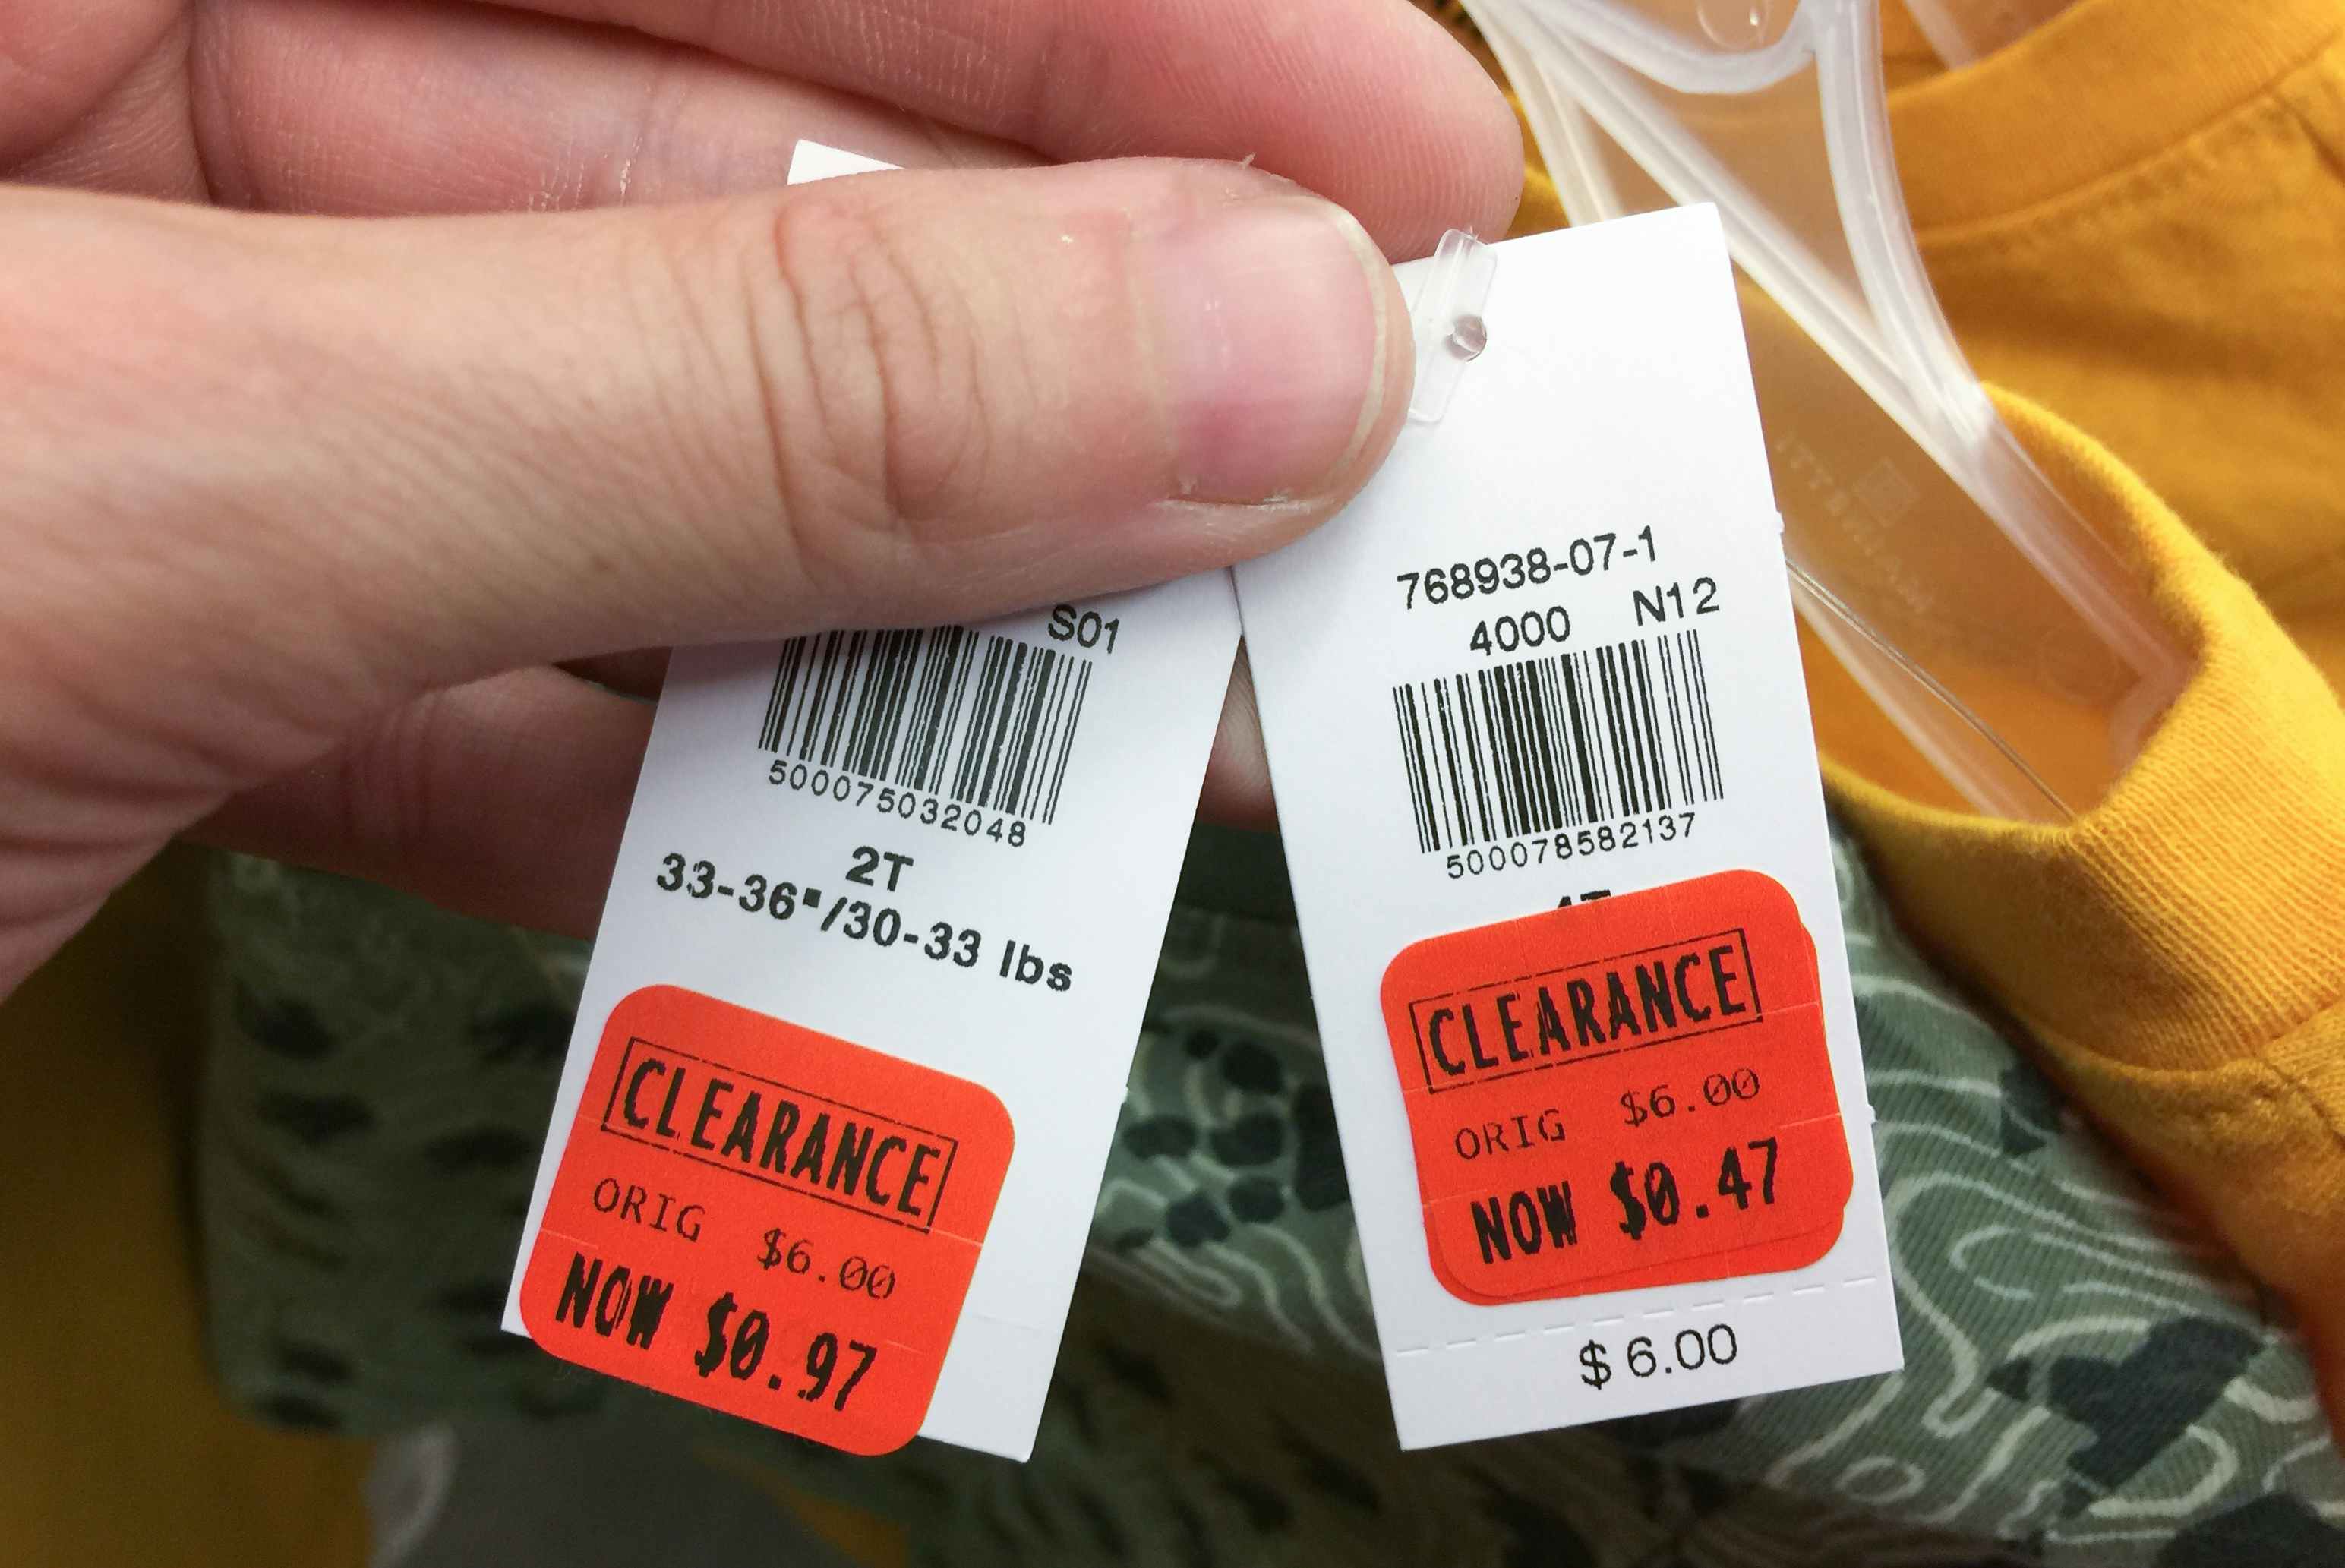 A person's hand holding up two clearance-stickered price tags, showing their marked-down prices, one being $0.97 and the other being $0.47